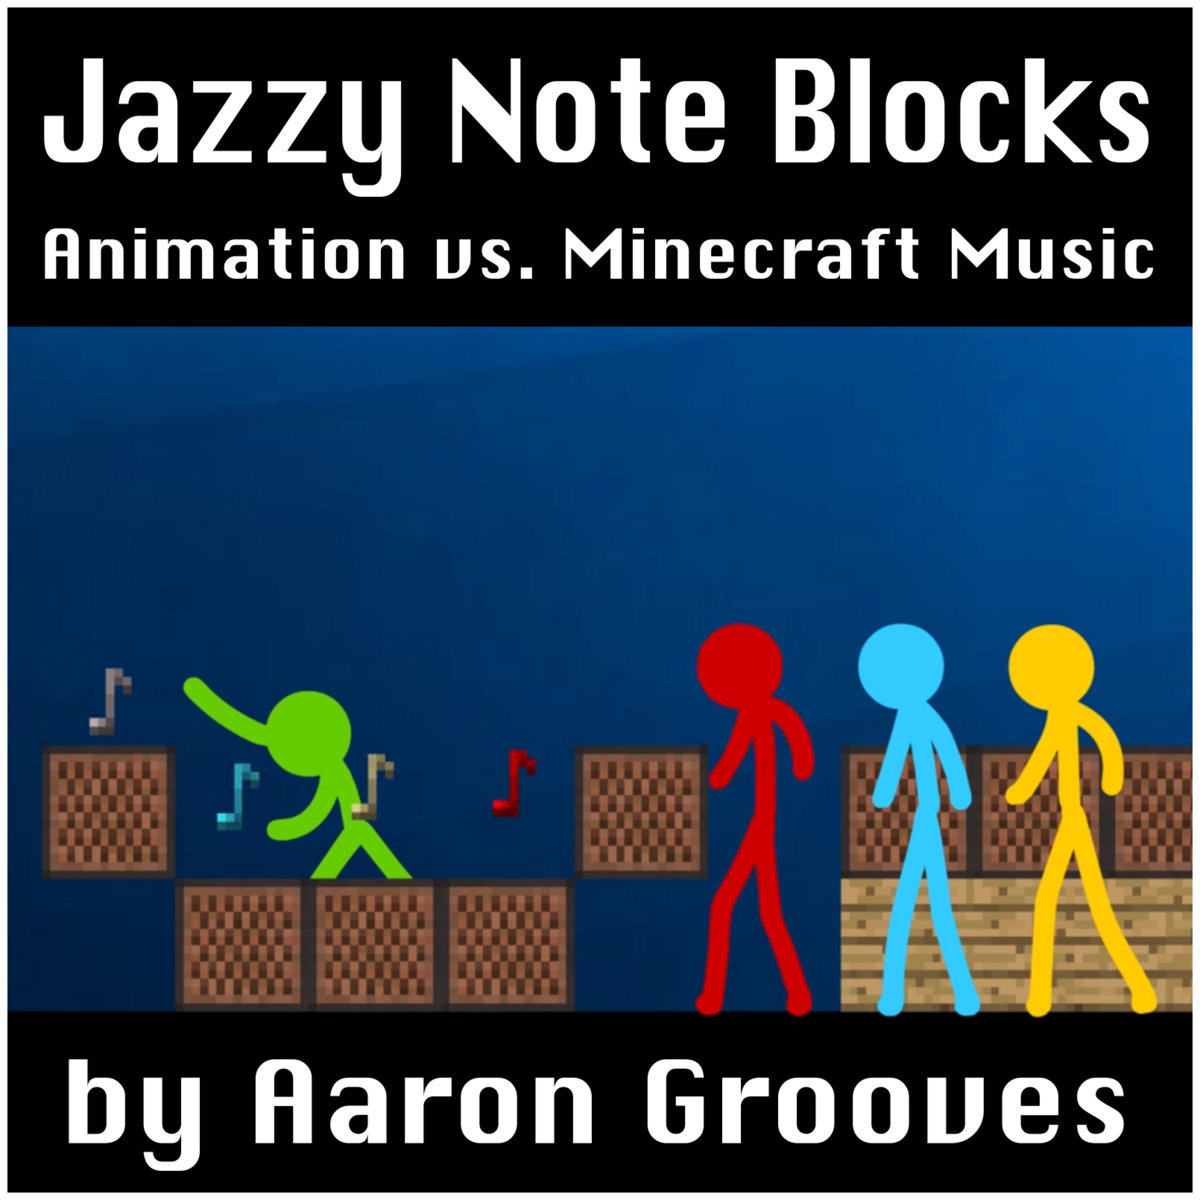 Note Blocks - Animation vs. Minecraft Shorts Ep. 5 (music by AaronGrooves), Note Blocks - Animation vs. Minecraft Shorts Ep. 5 (music by  AaronGrooves) Source: Alan Becker, By Learning games